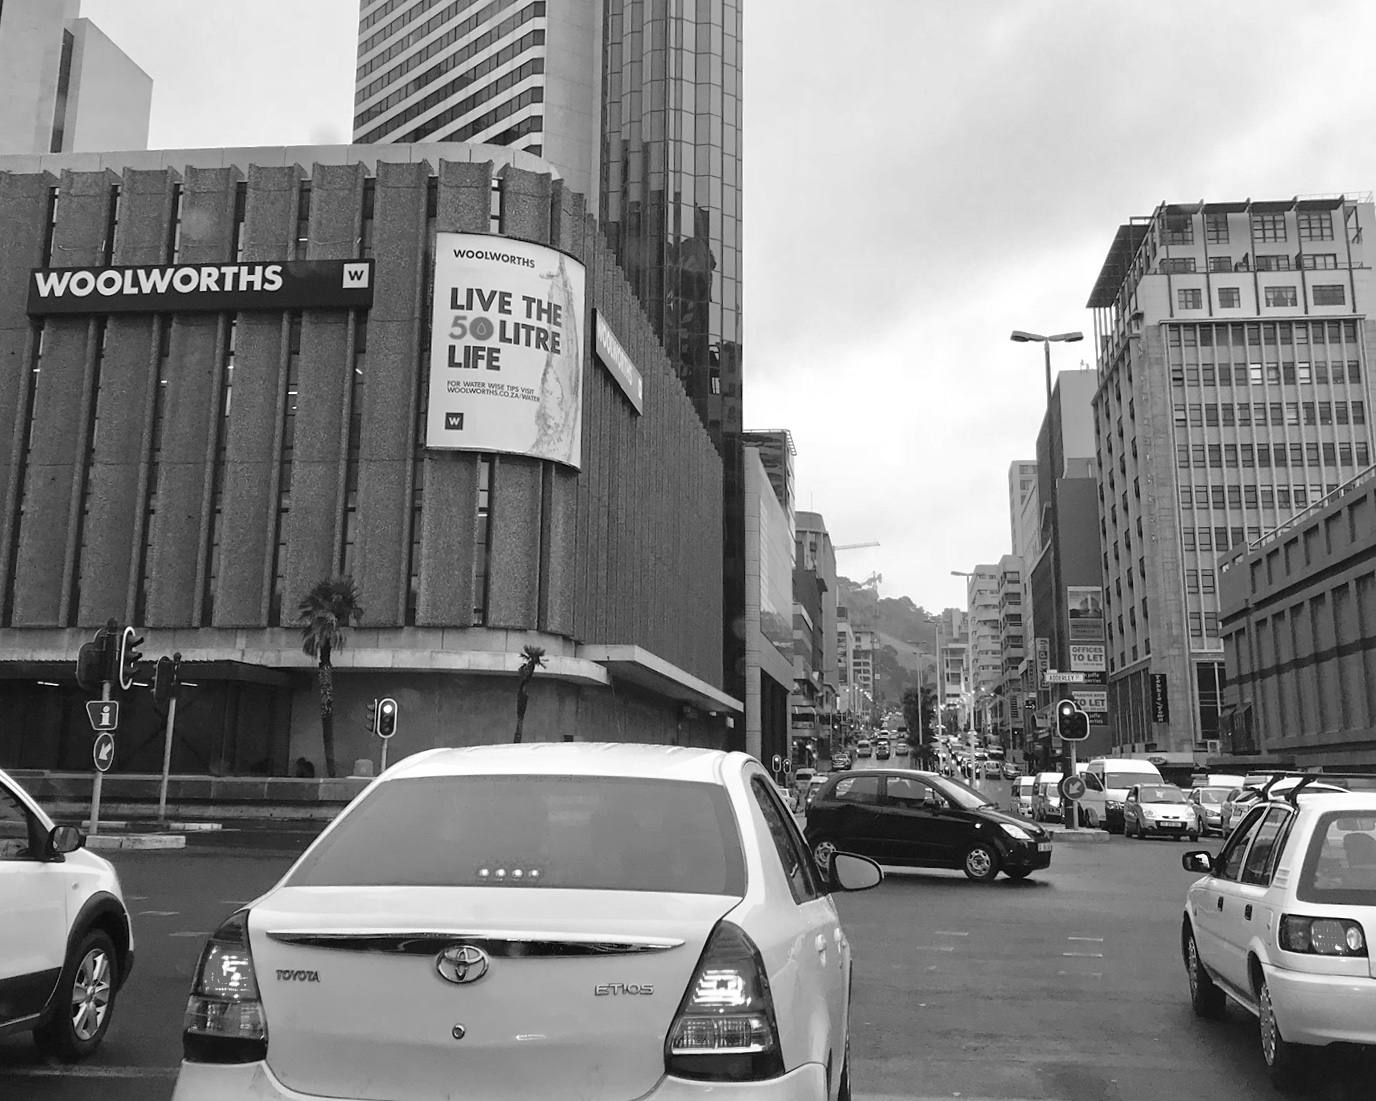 Cape Town: The Central Business District